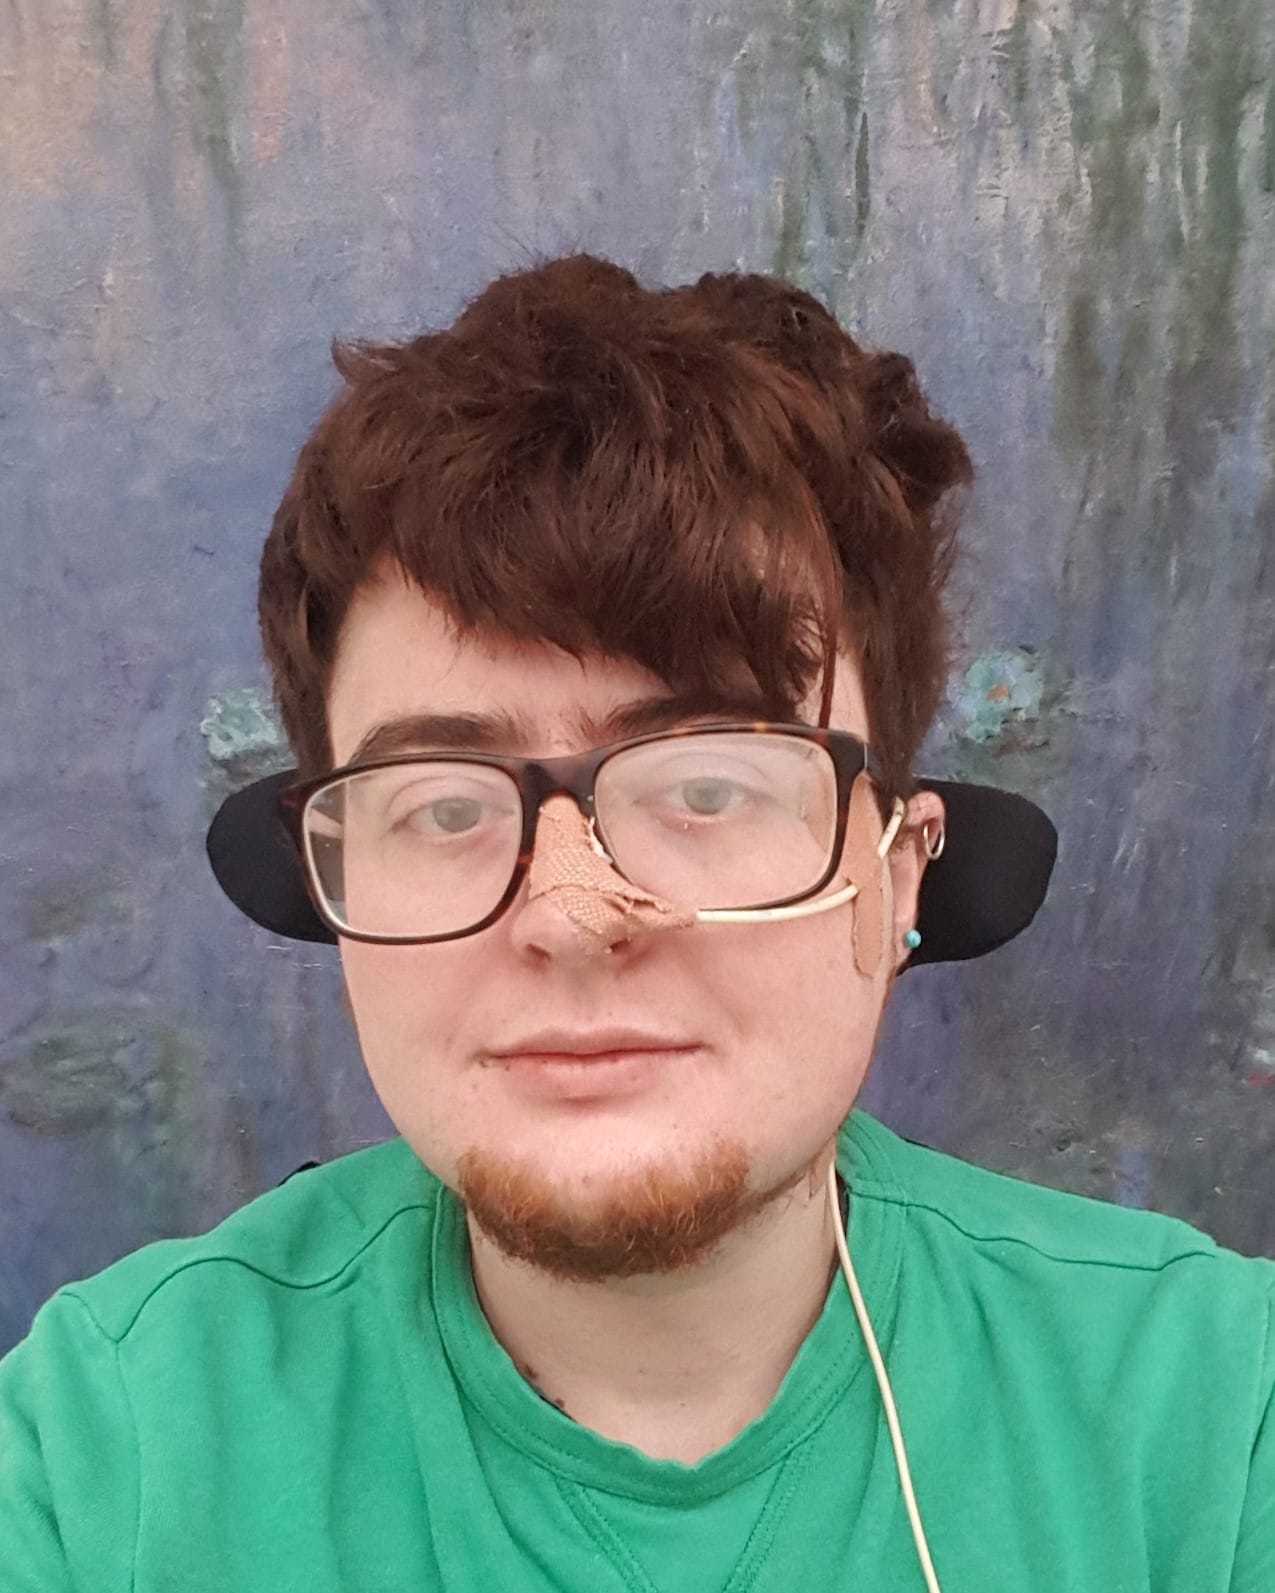 Jamie is looking directly at the camera, wearing glasses, and a green t-shirt. Jamie has thick red hair, a beard, two ear piercings, and a nasal tube.